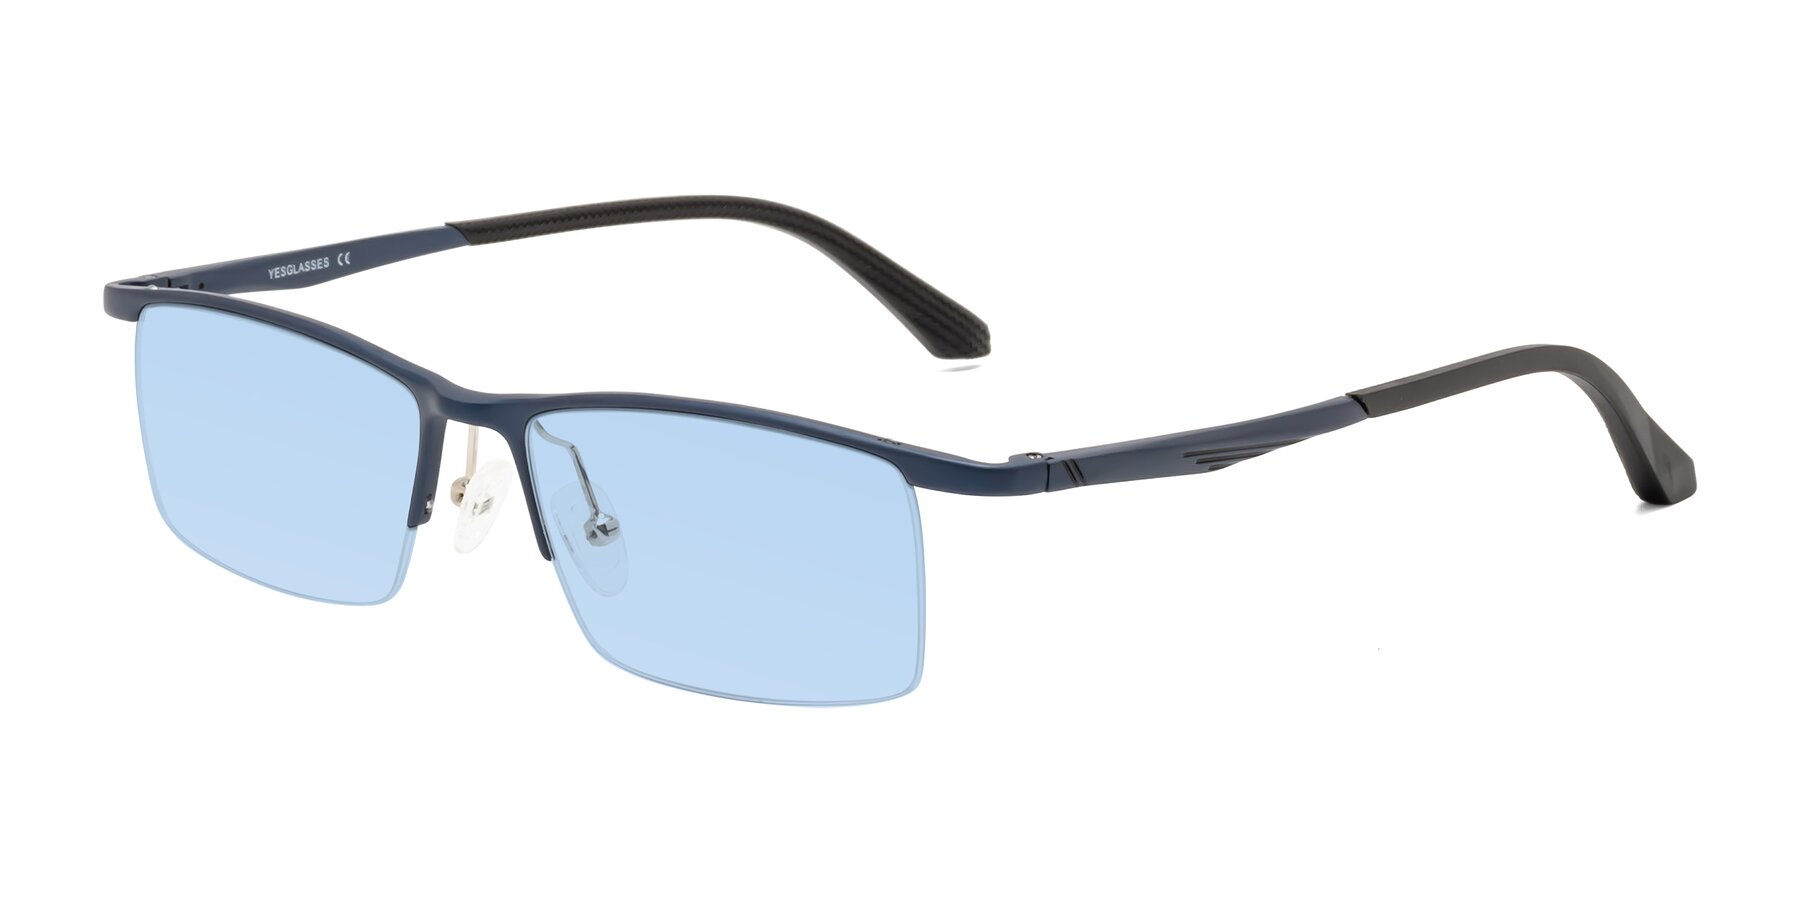 Angle of CX6236 in Blue with Light Blue Tinted Lenses